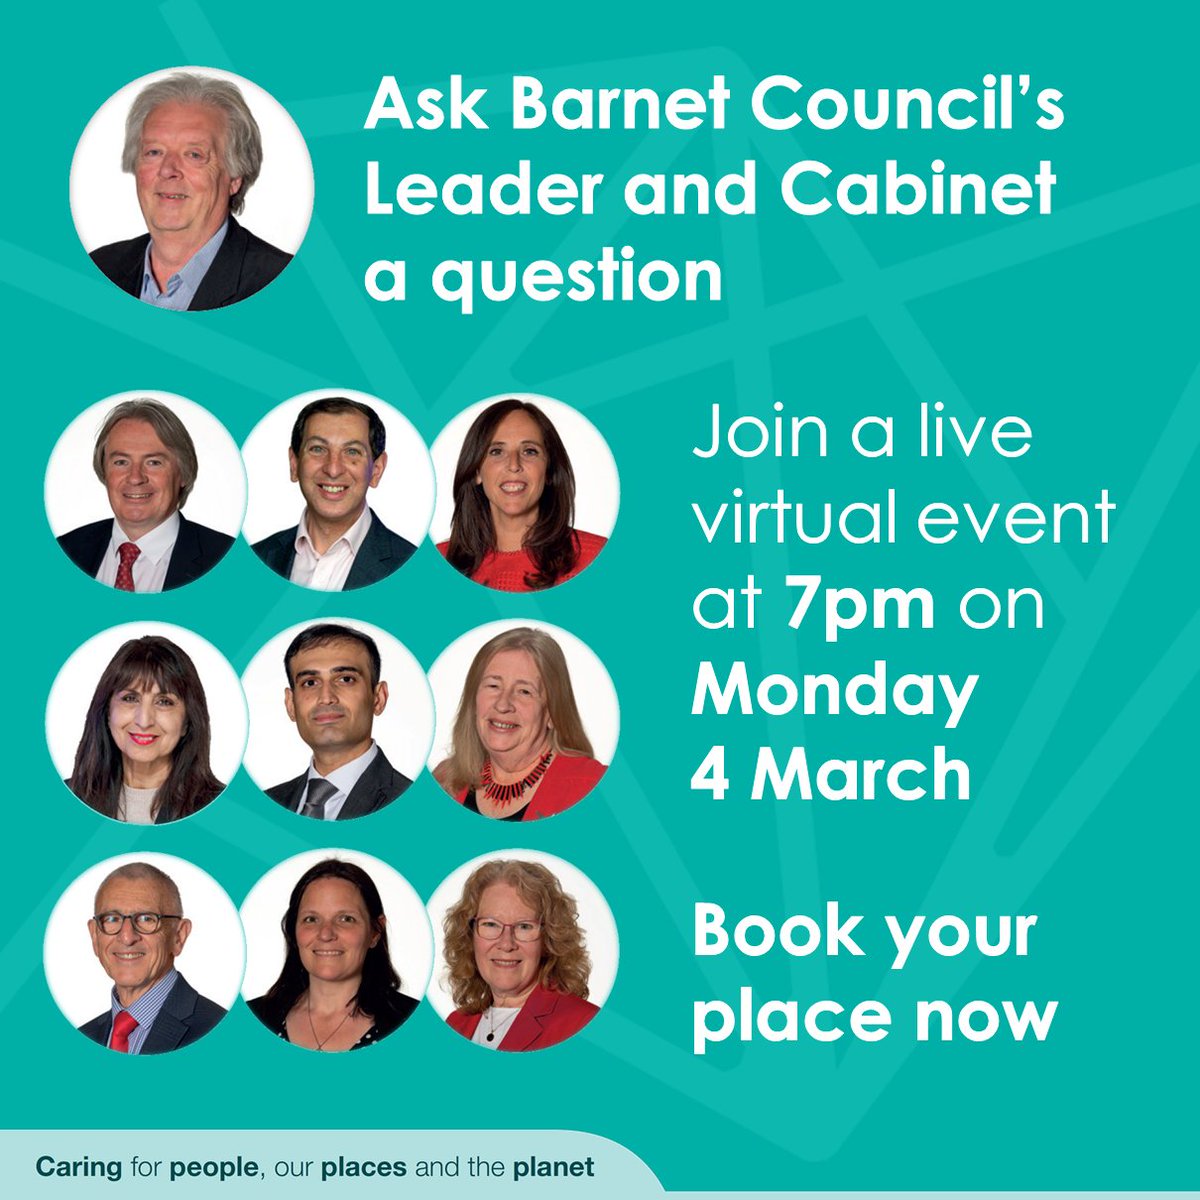 Barnet Council is holding its third Barnet Question Time, where you’ll get the chance to put your questions to the Leader of the Council, Cllr Barry Rawlings, and his Cabinet. This live online event takes place on Monday 4 March at 7pm. See below for more information